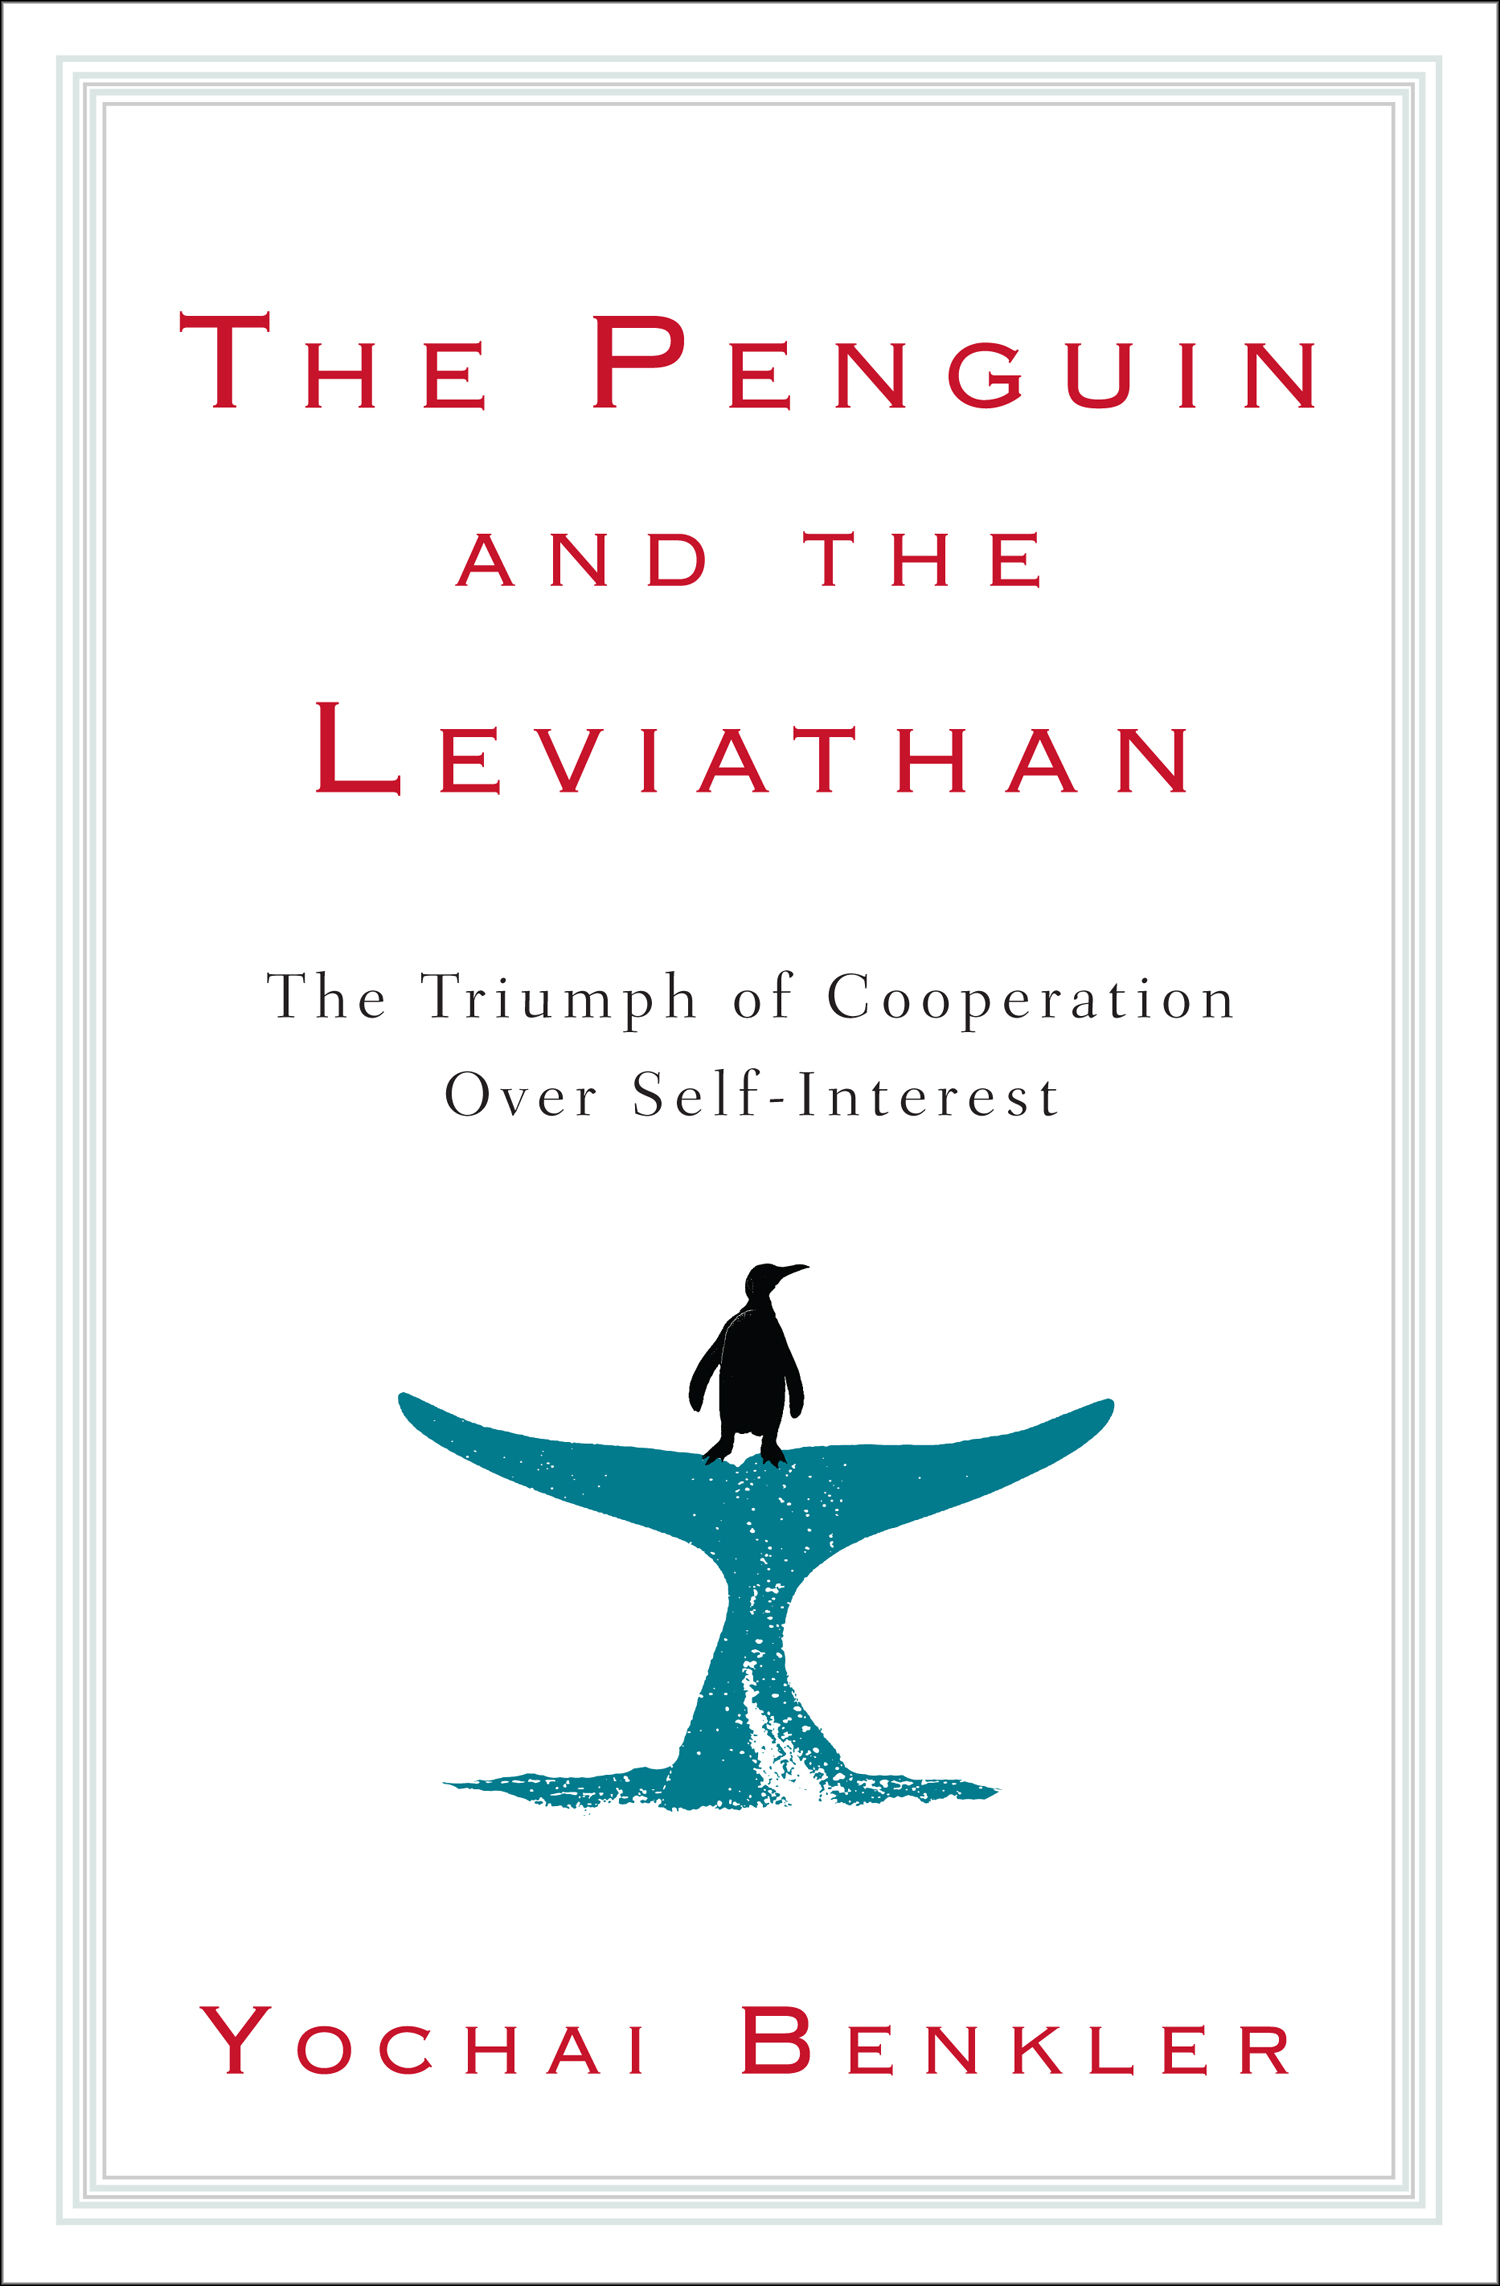 THE-PENGUIN-AND-THE-LEVIATHAN-comp2-ss6.jpg